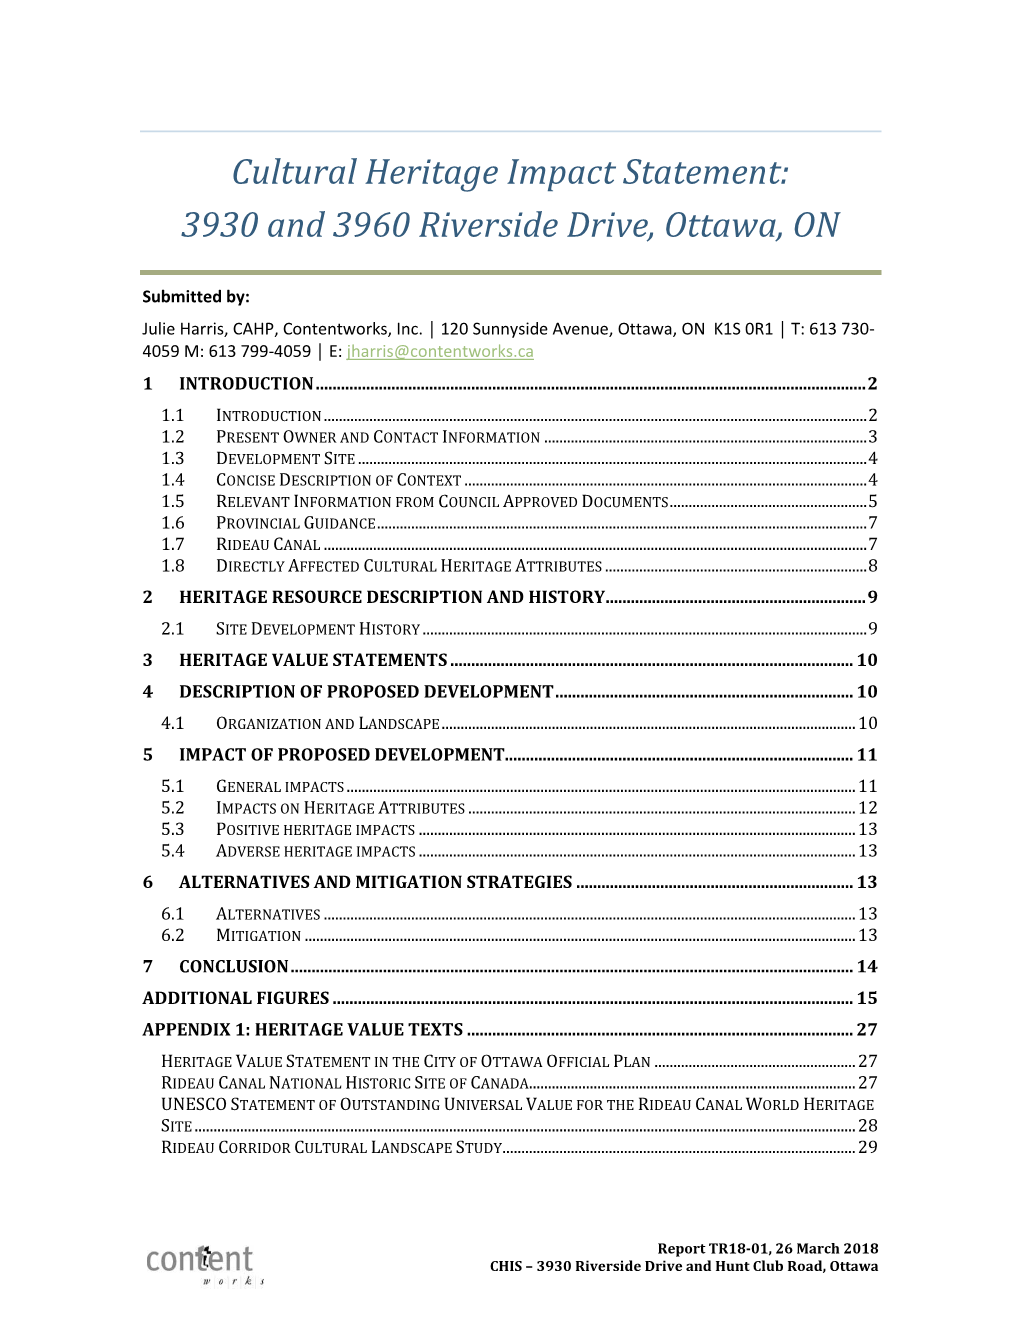 Cultural Heritage Impact Statement: 3930 and 3960 Riverside Drive, Ottawa, ON